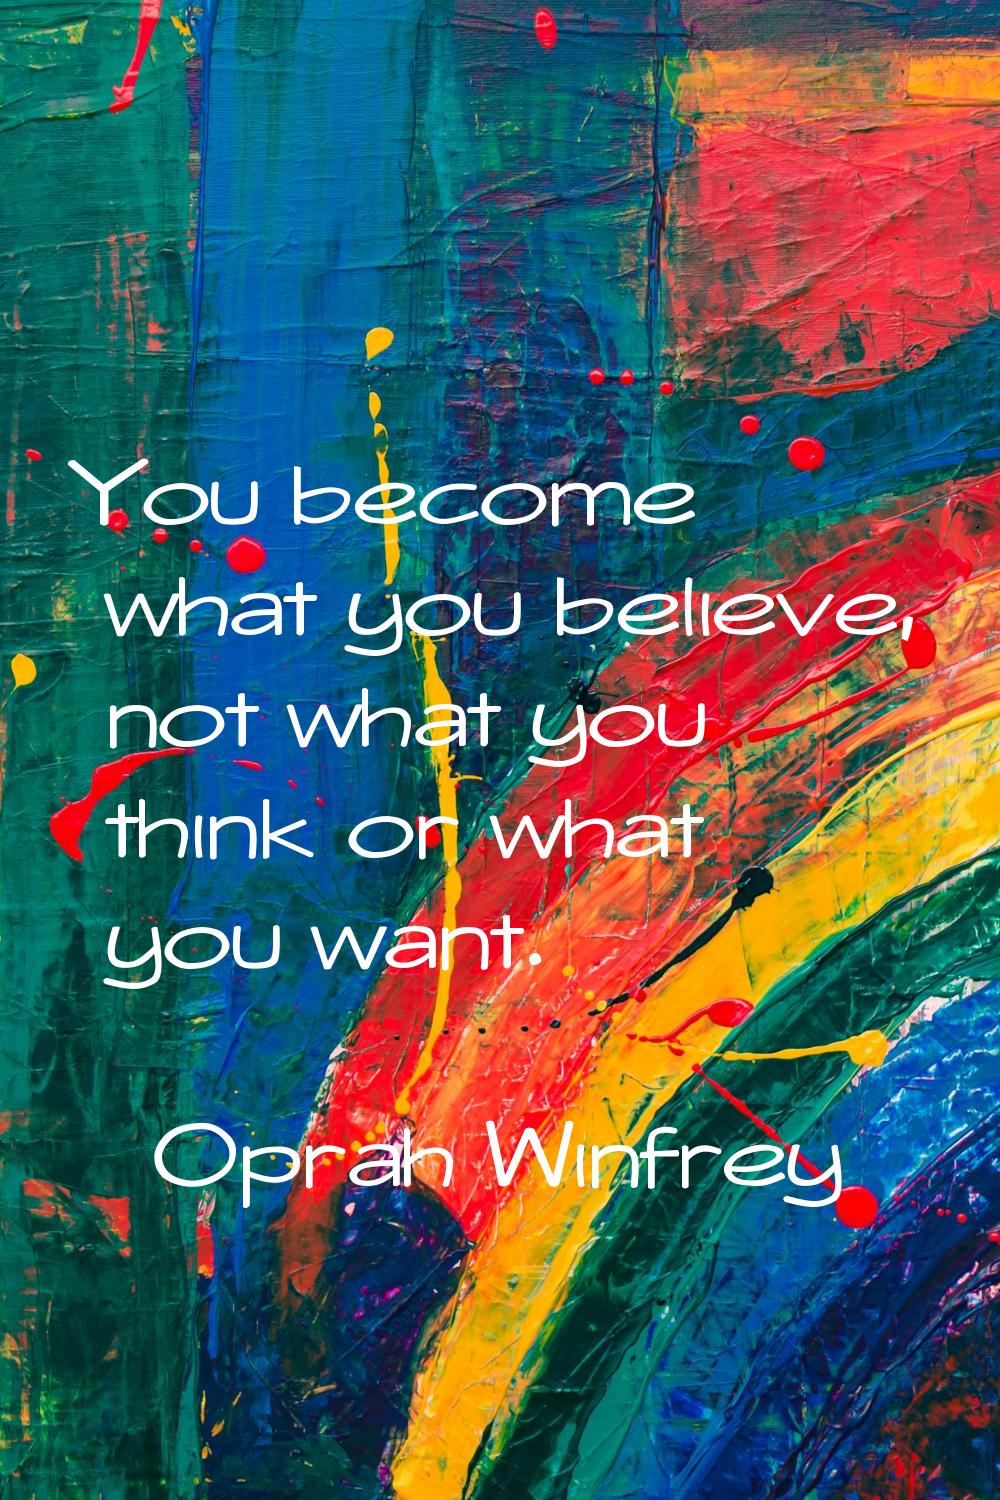 You become what you believe, not what you think or what you want.